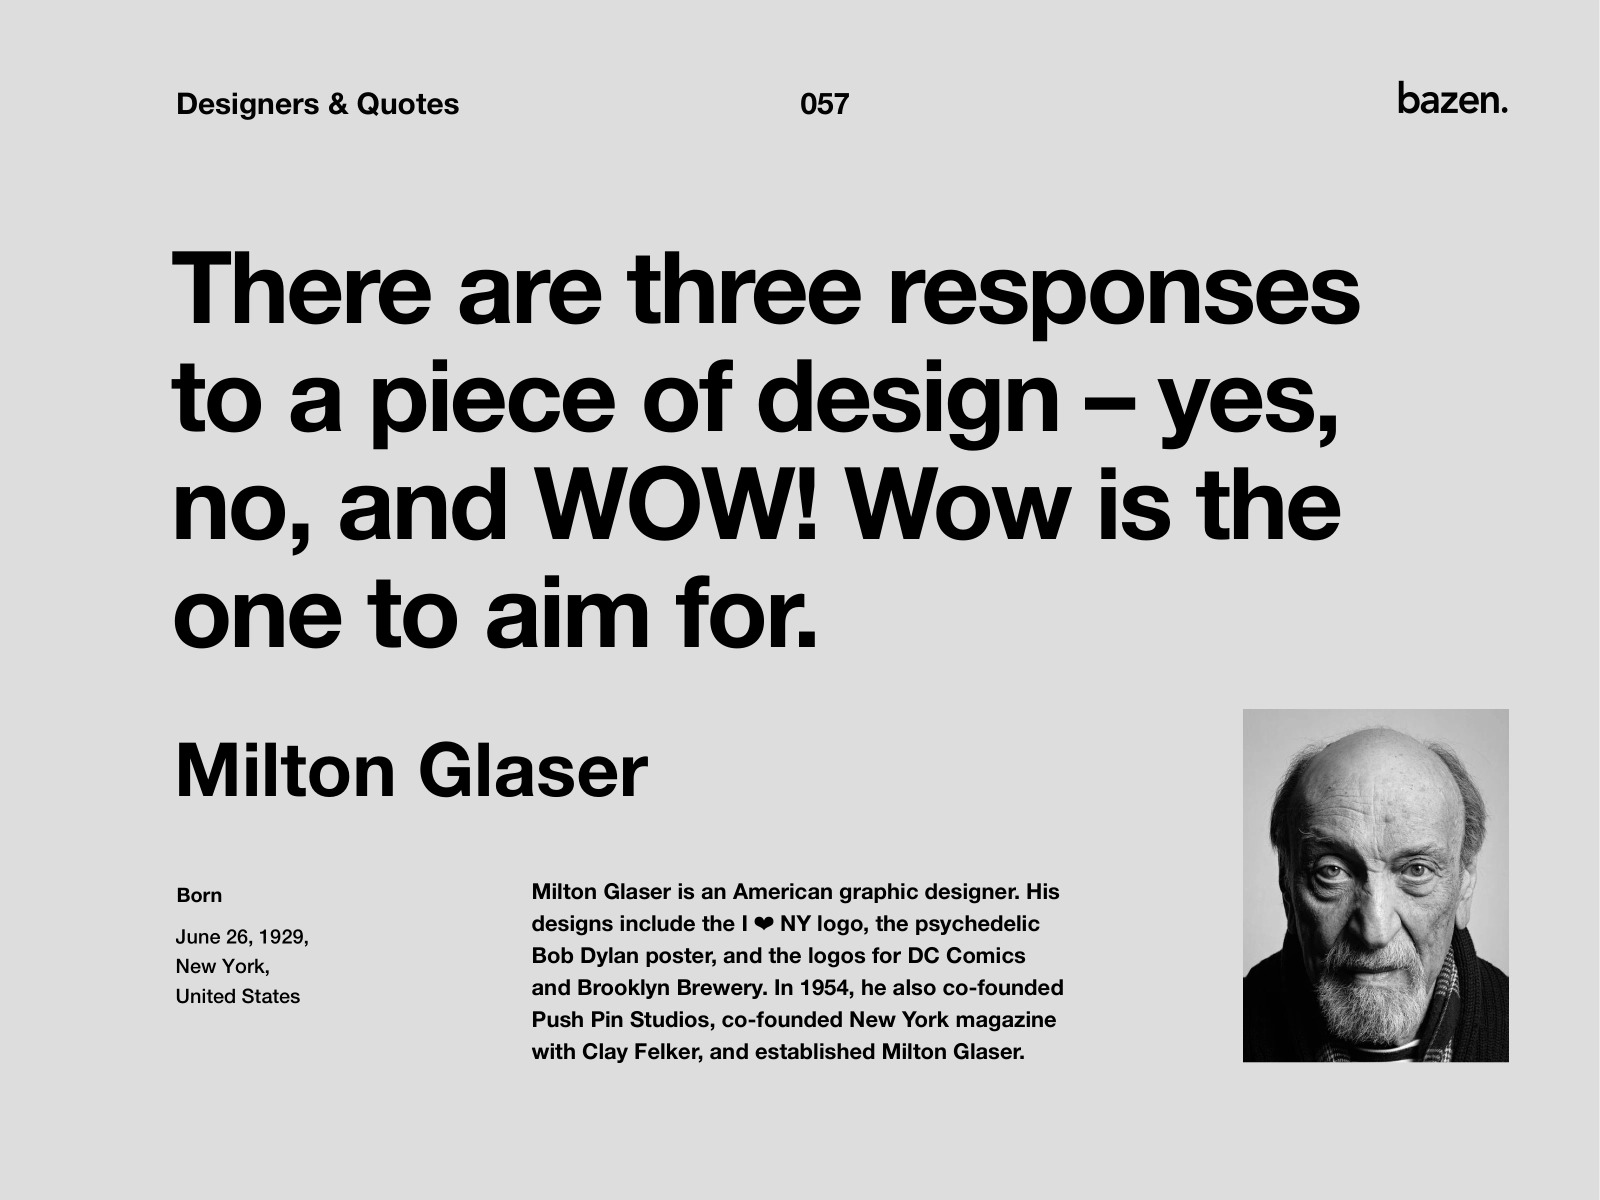 Image of Design quote said by Milton Glaser